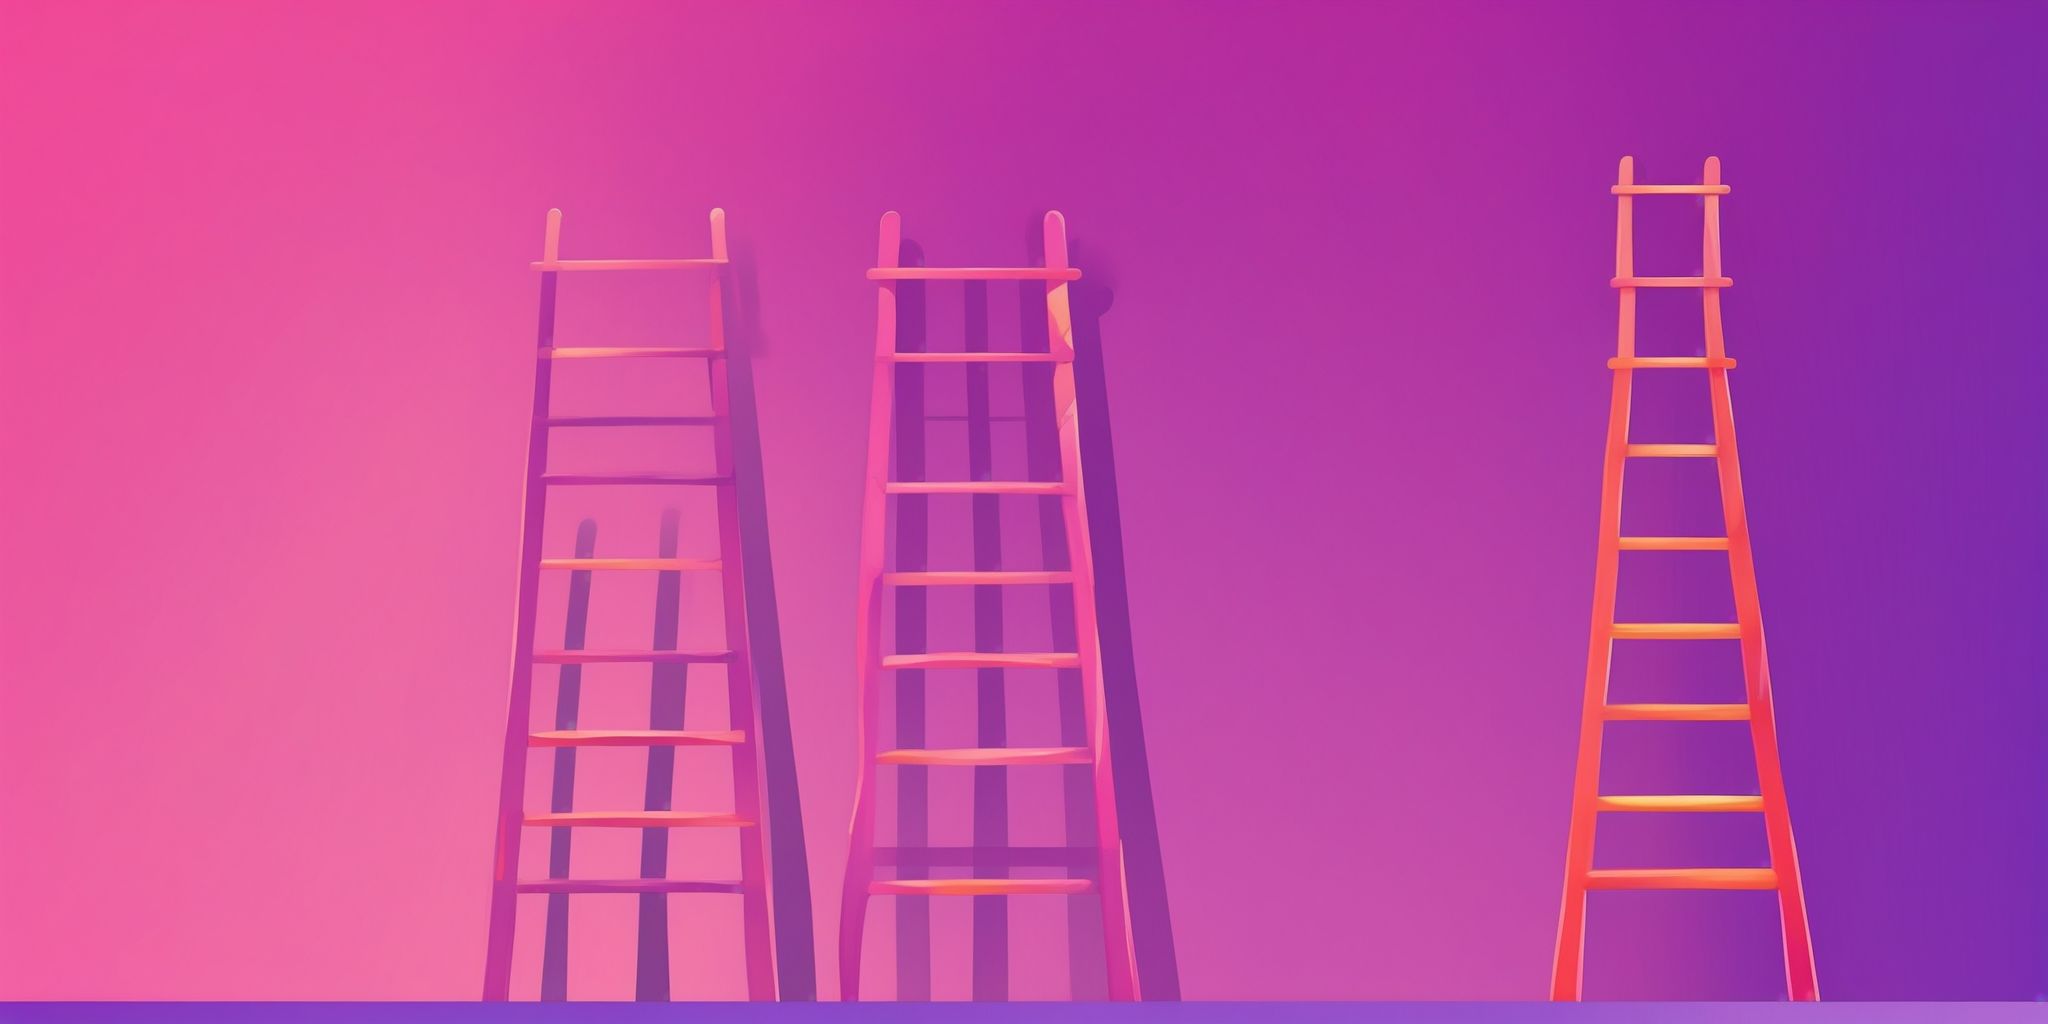 Ladder in flat illustration style, colorful purple gradient colors